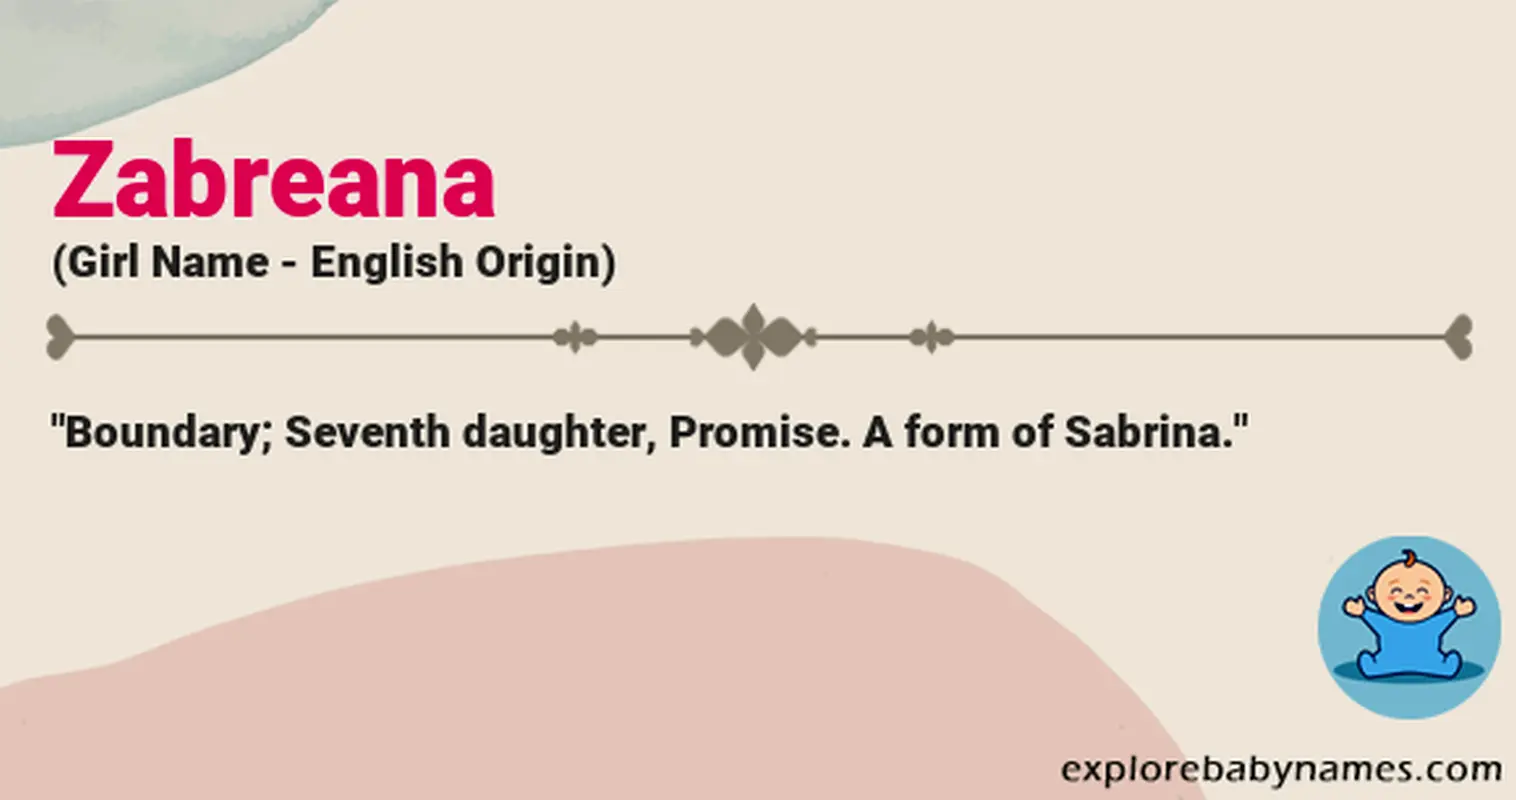 Meaning of Zabreana